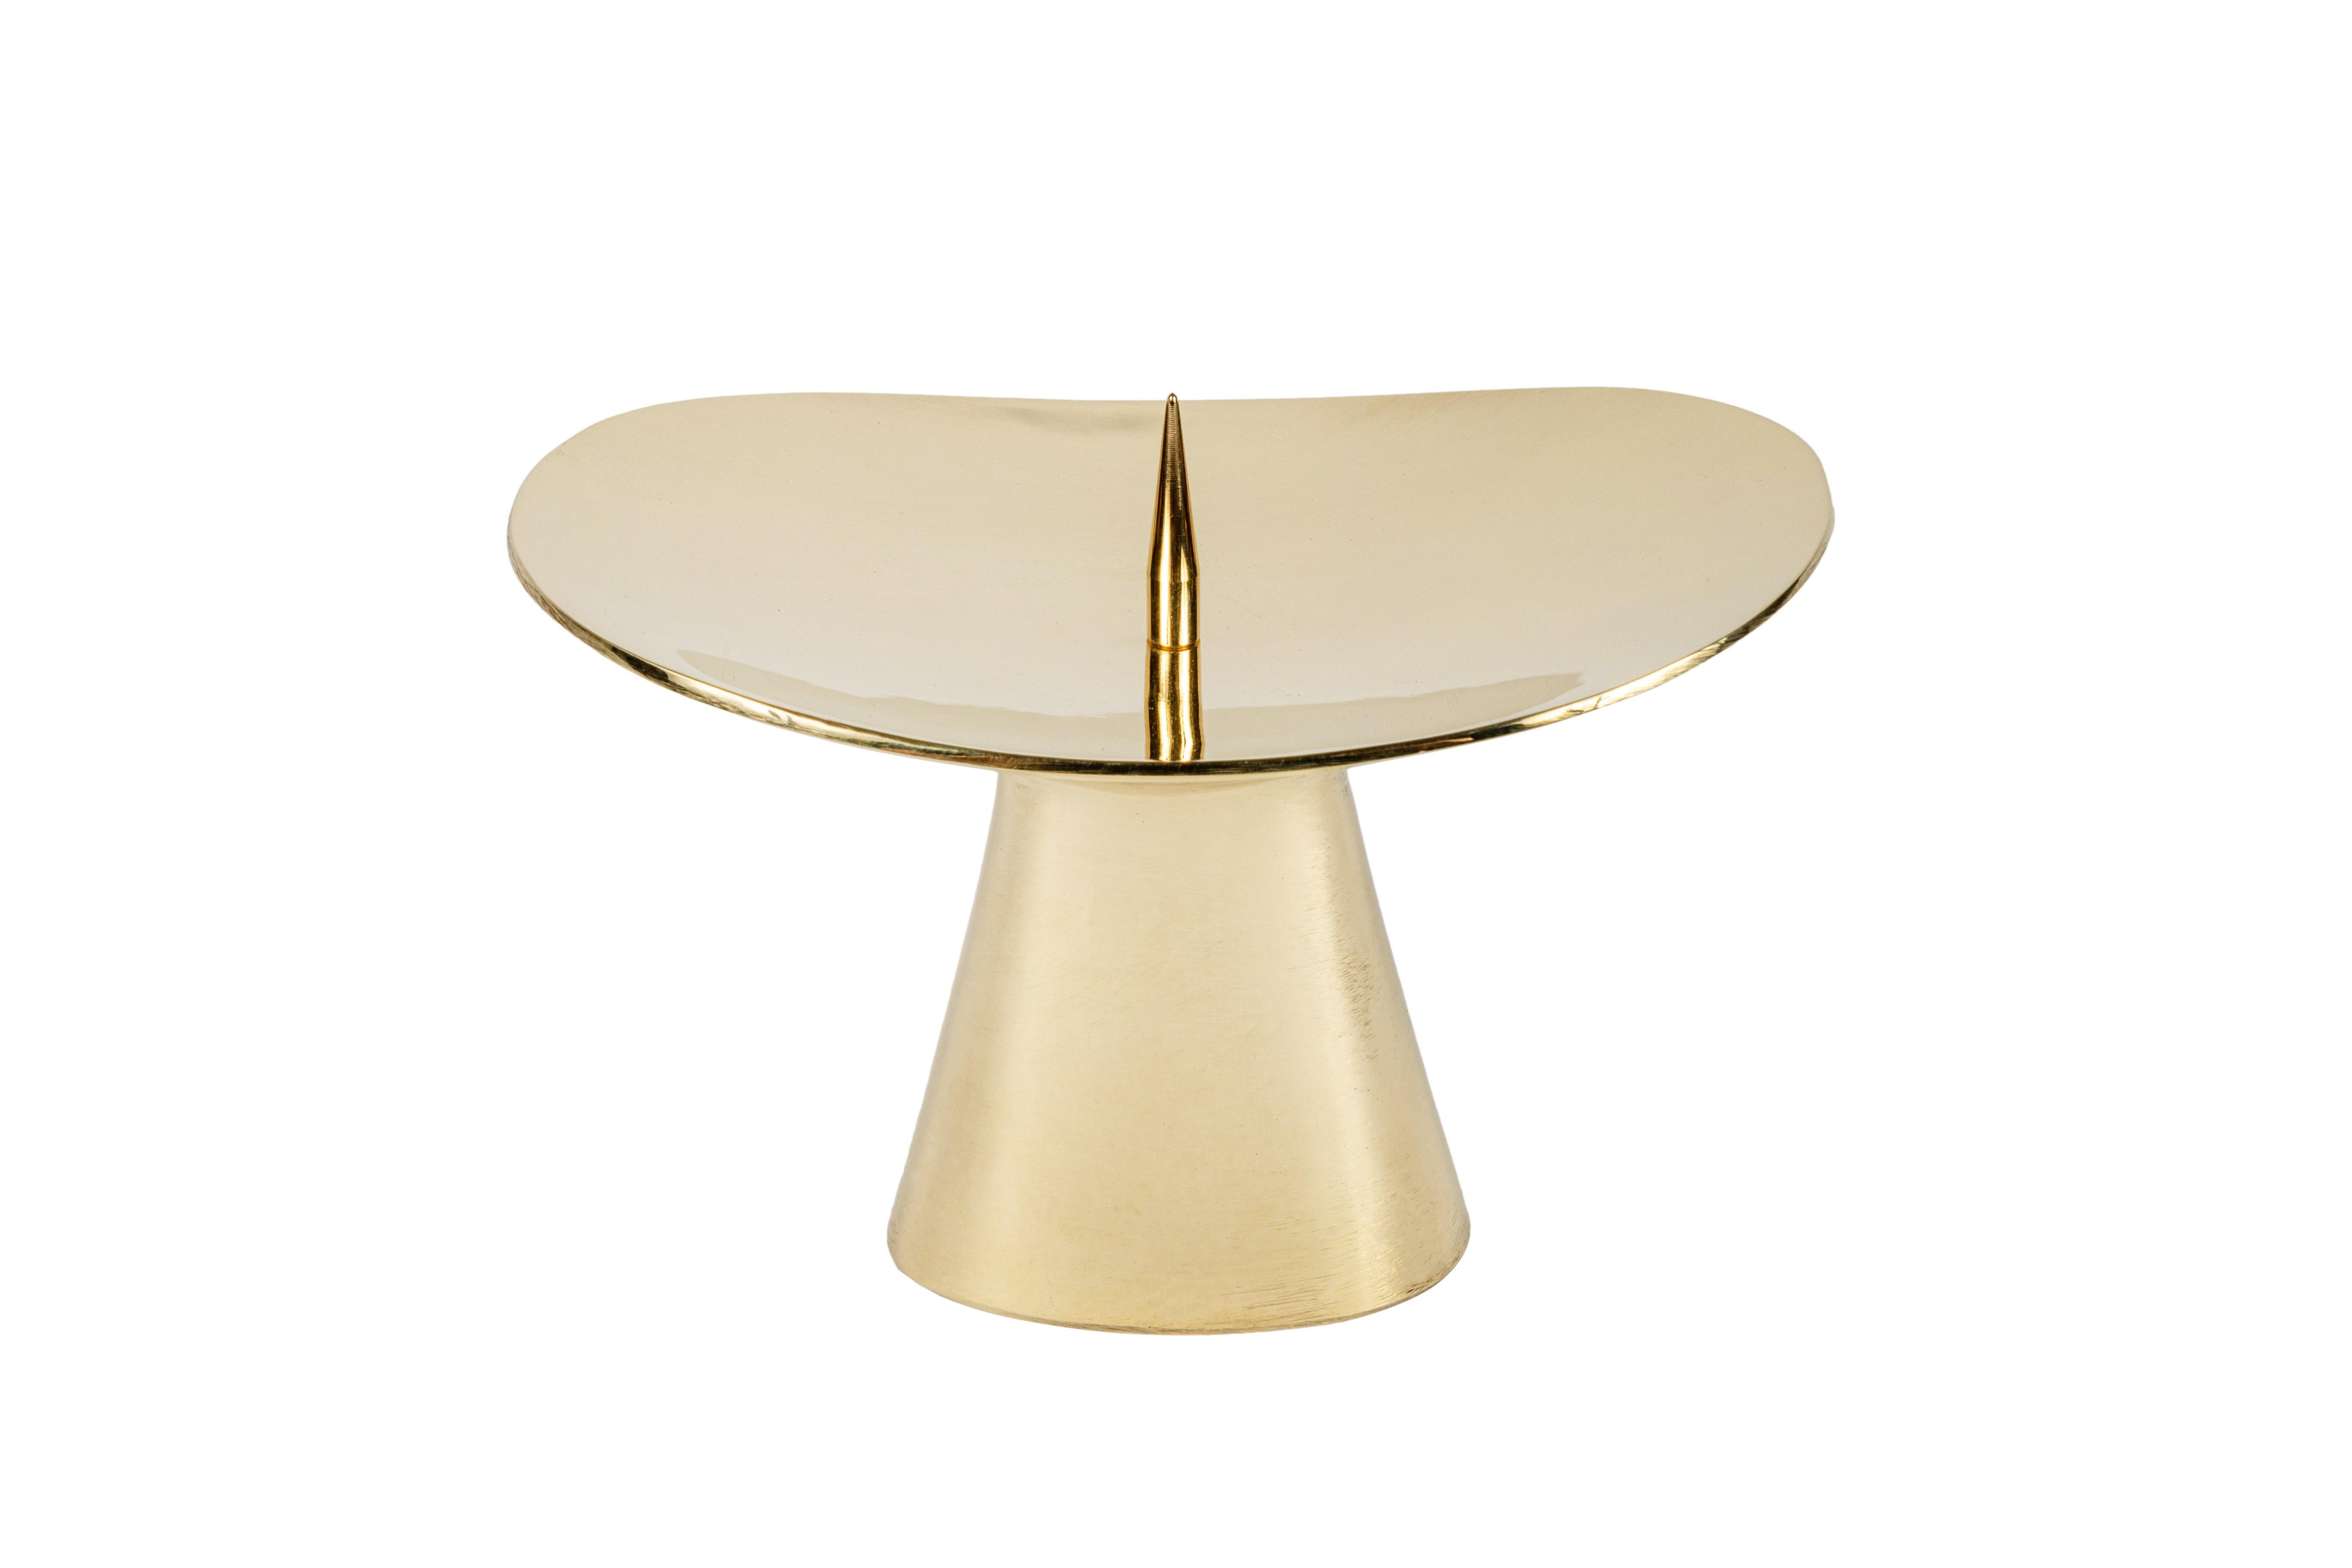 Carl Auböck Model #3469 polished brass candleholder. Designed in the 1950s, this versatile and Minimalist Viennese candleholder is executed in polished and patinated brass by Werkstätte Carl Auböck, Austria. 

Price is per item. Two in stock ready